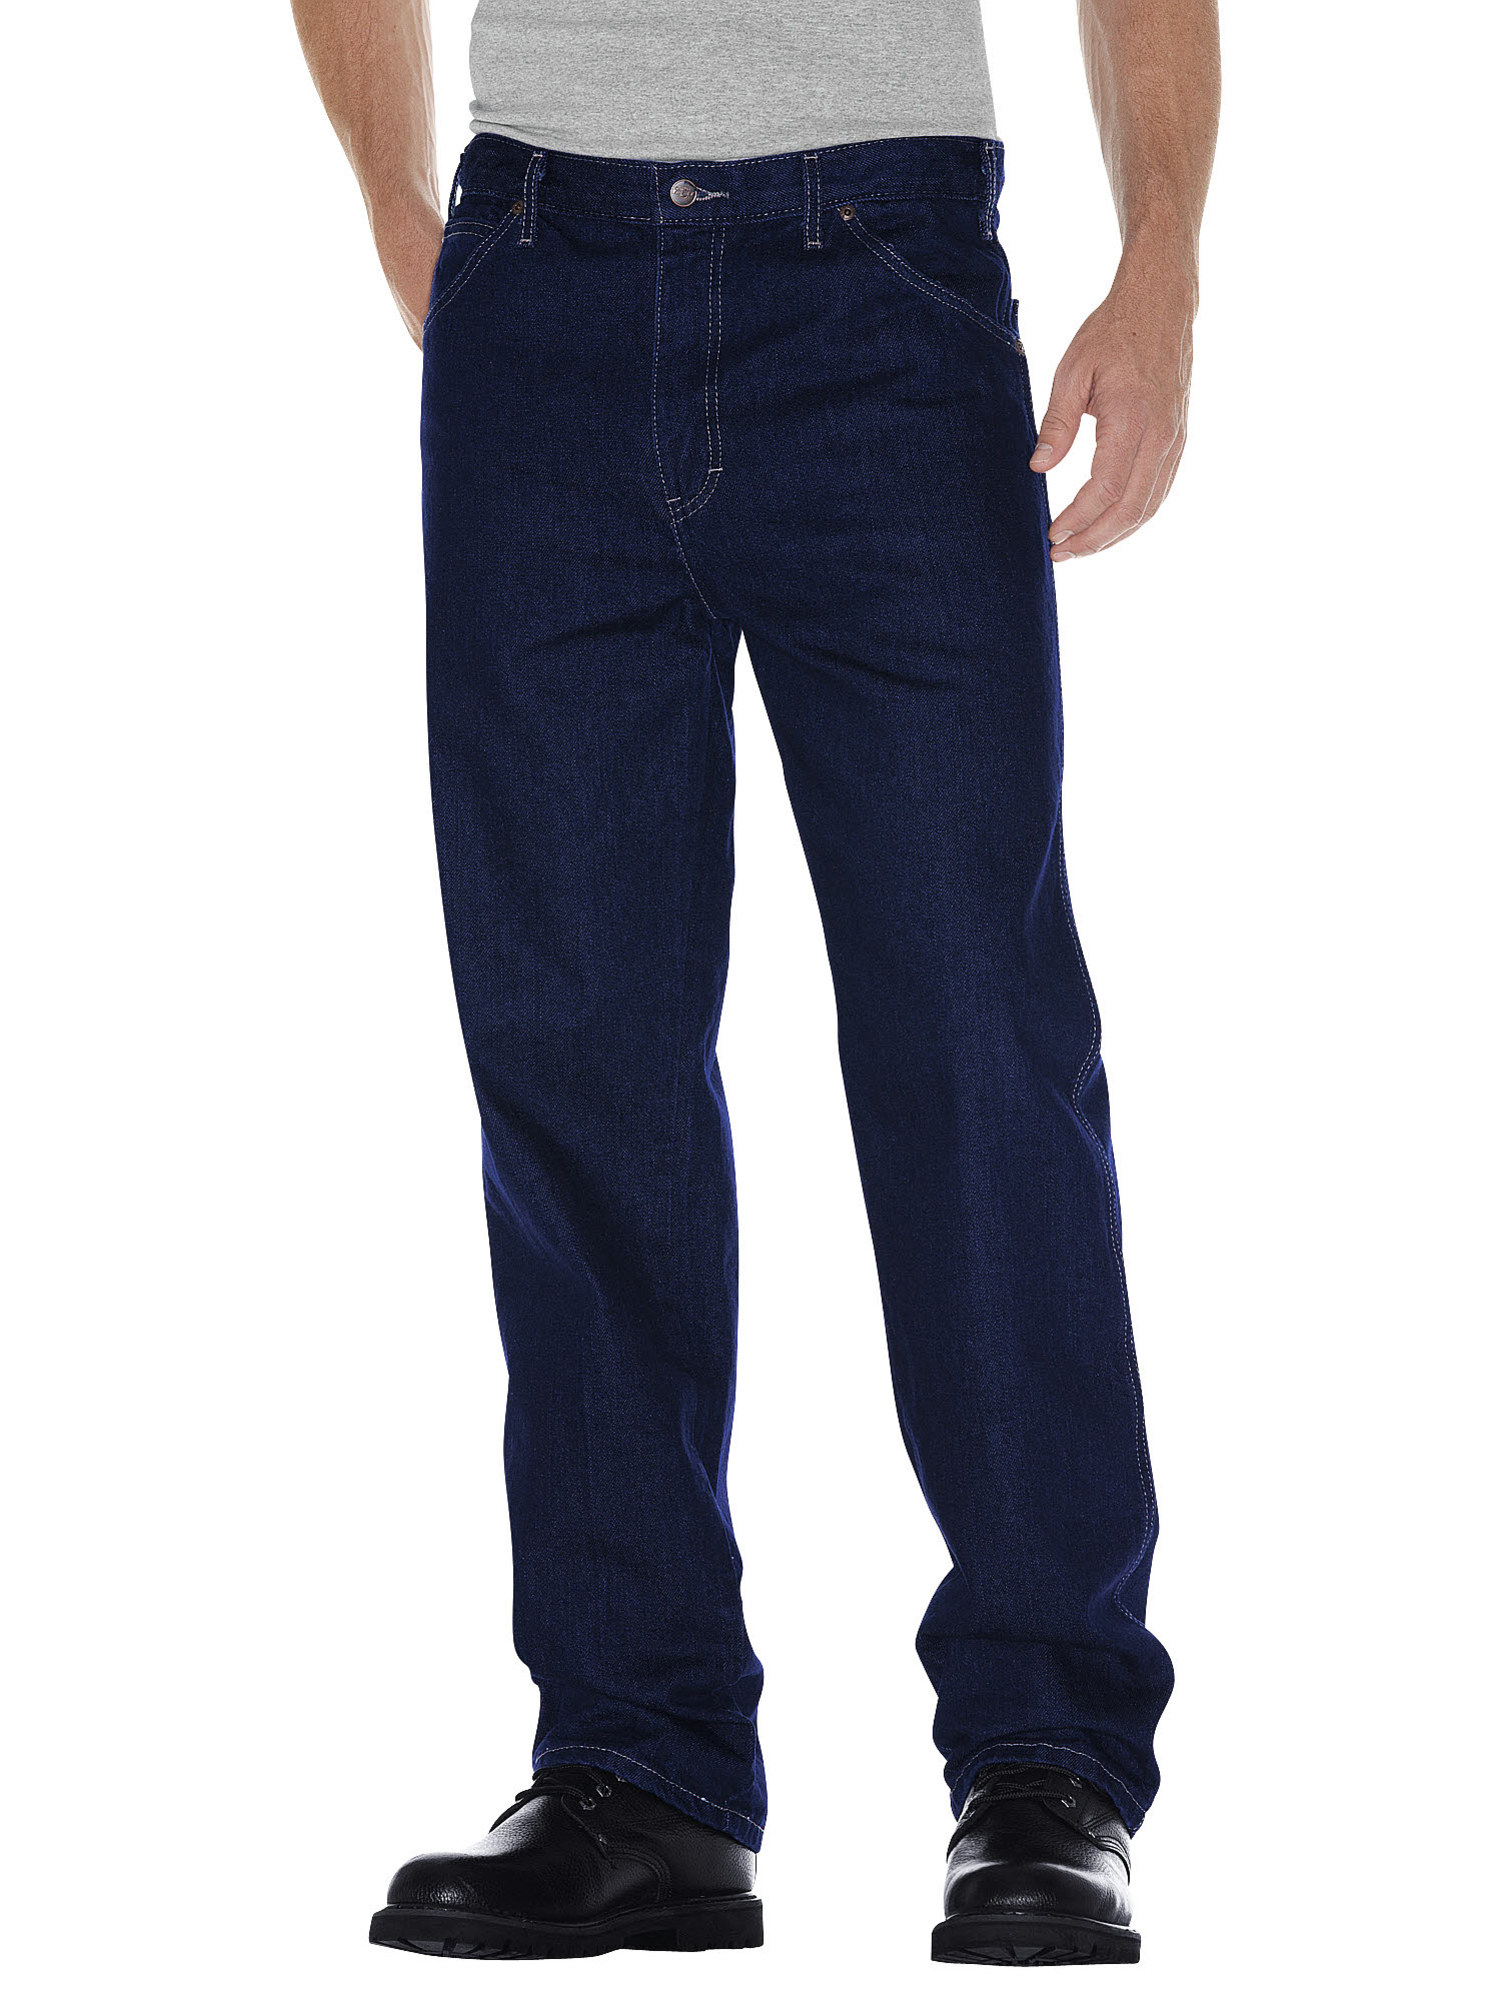 Dickies Mens and Big Mens Relaxed Straight Fit 5-Pocket Denim Jeans - image 1 of 2